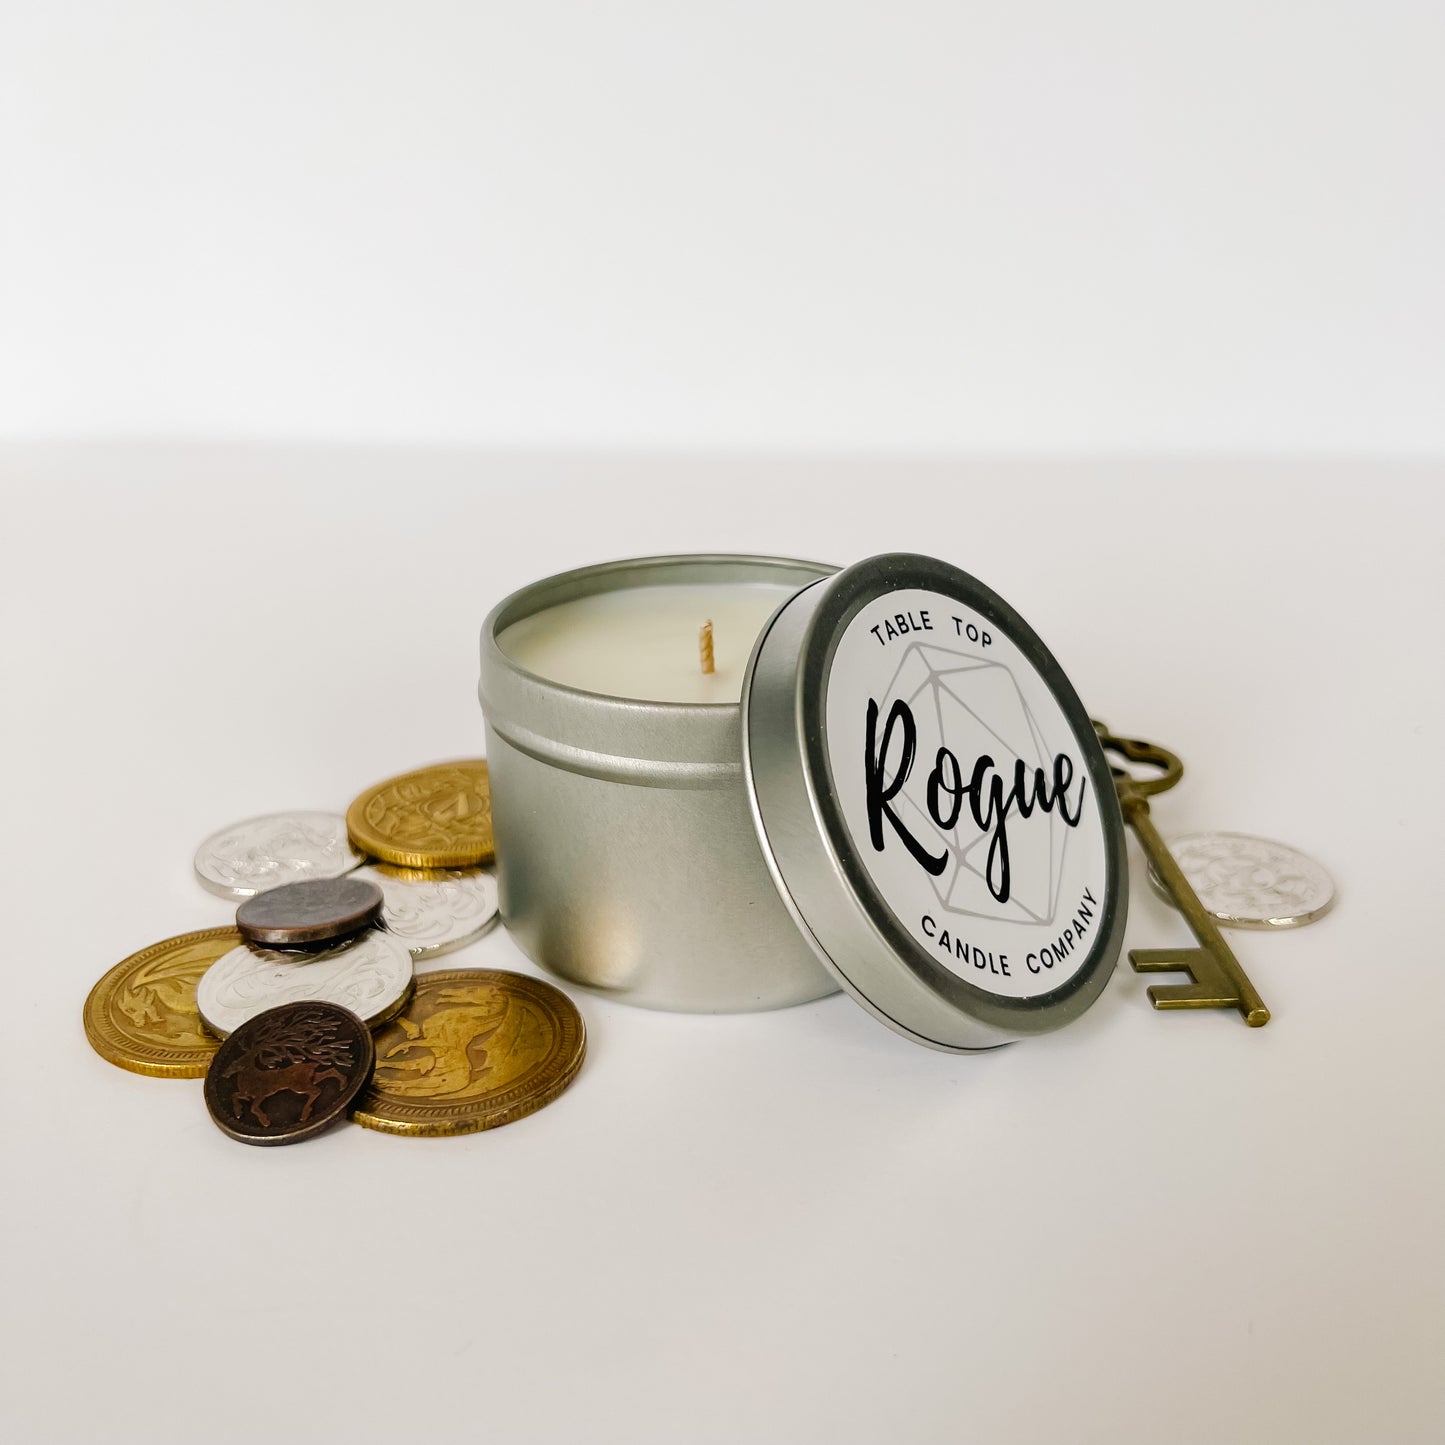 Our four ounce candle. In our Rogue scent it is surrounded by coins and a key.  